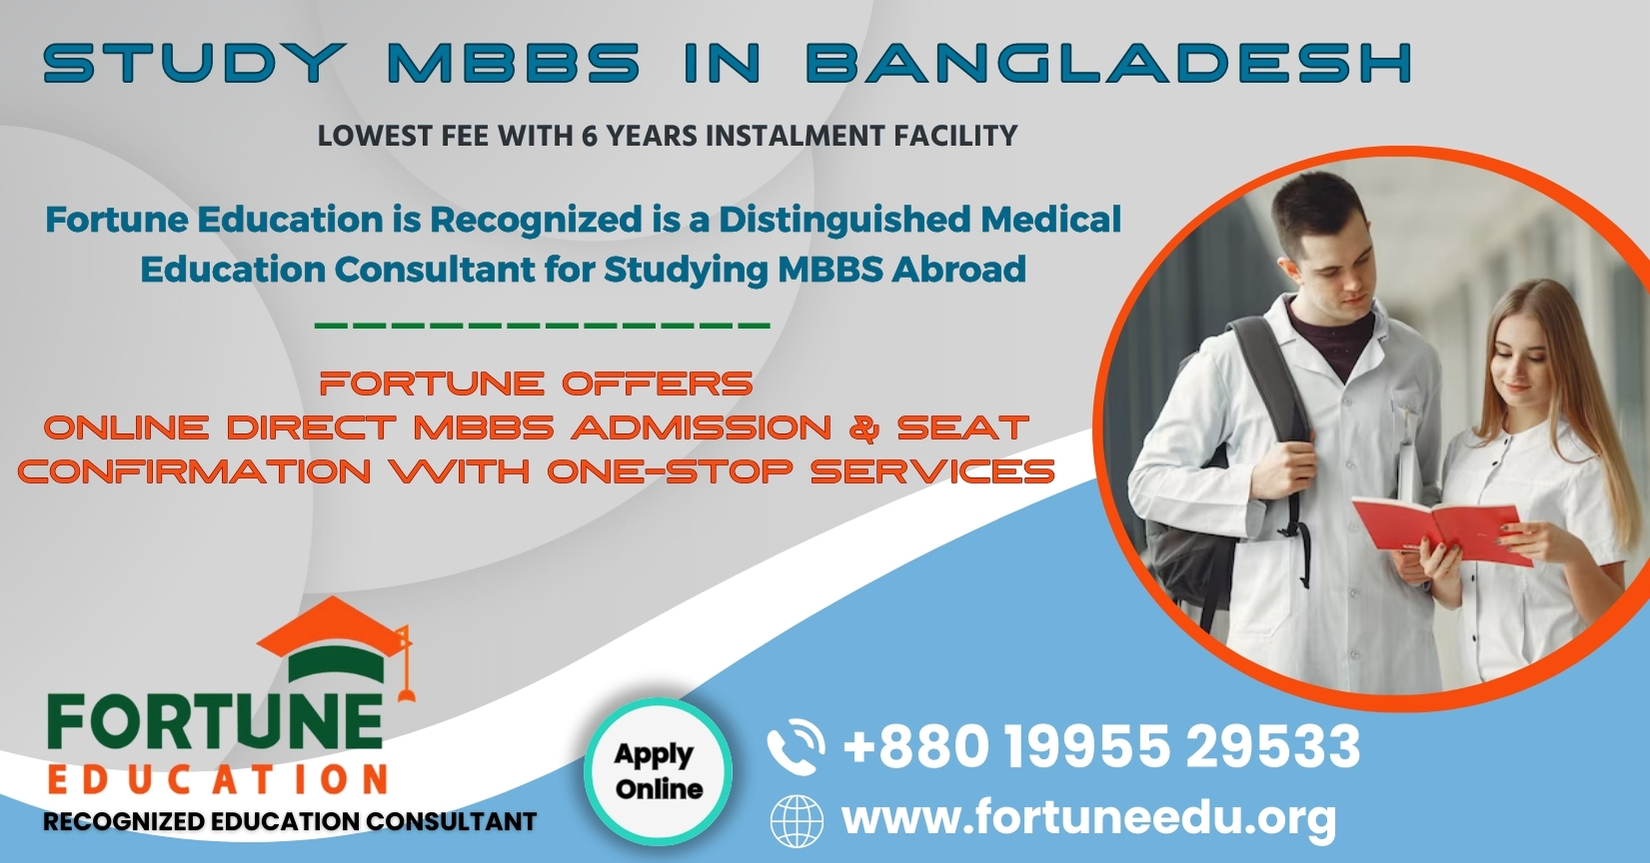 Study MBBS in Bangladesh Through Fortune Education,